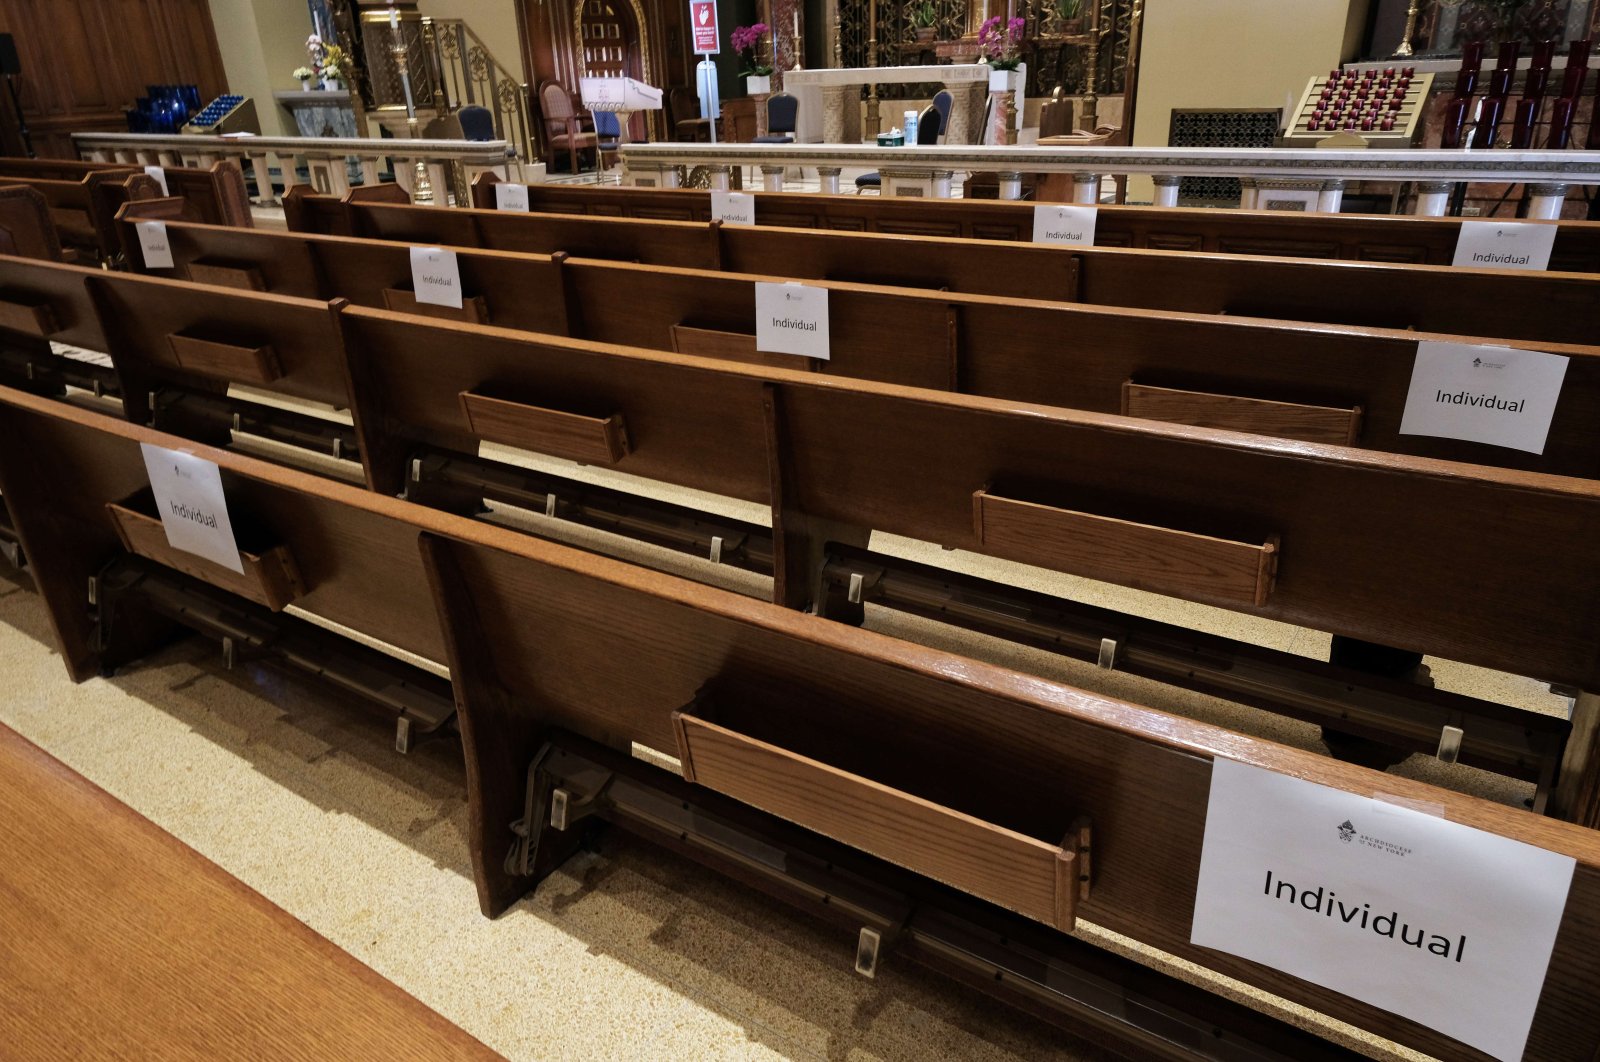 Social distancing protections are displayed at Our Savior Parish in New York, May 21, 2020. (AFP Photo) 